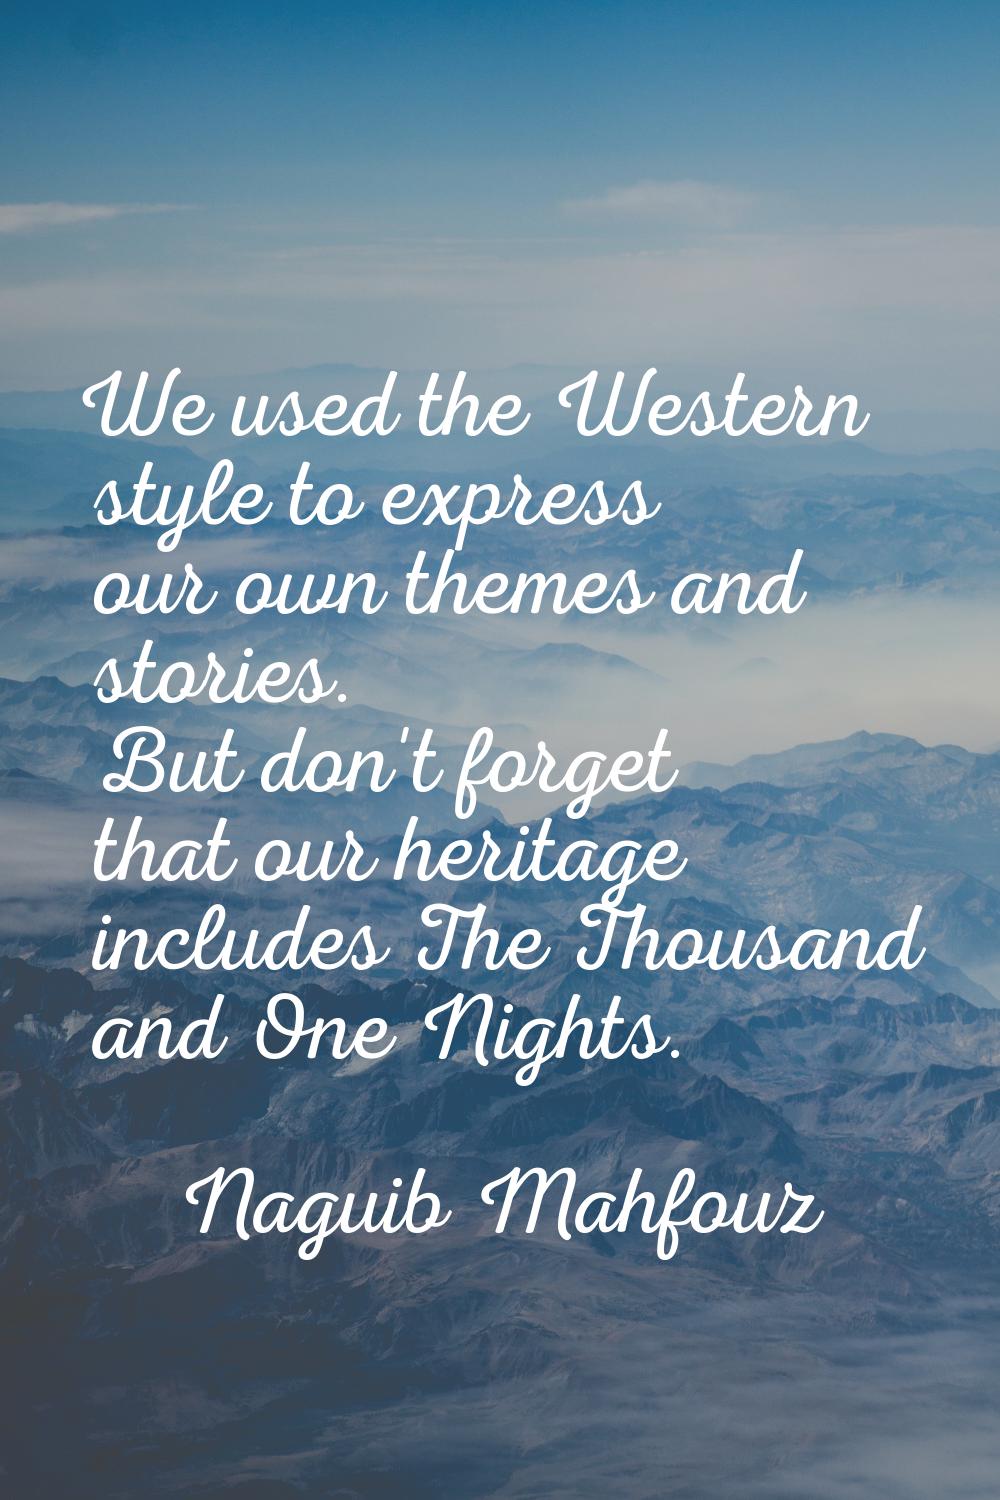 We used the Western style to express our own themes and stories. But don't forget that our heritage